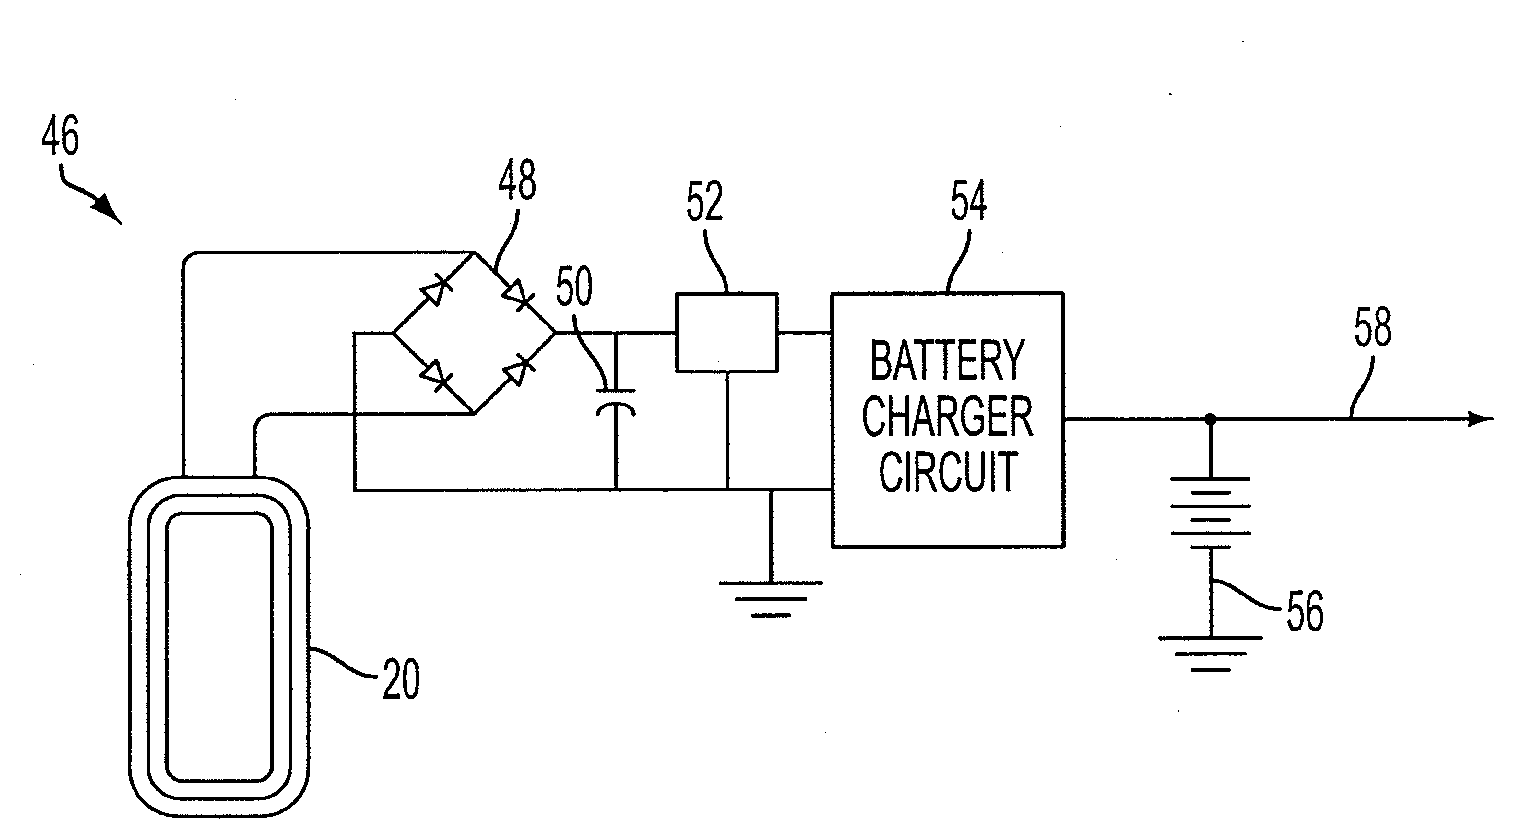 Inductive battery charger for service equipment